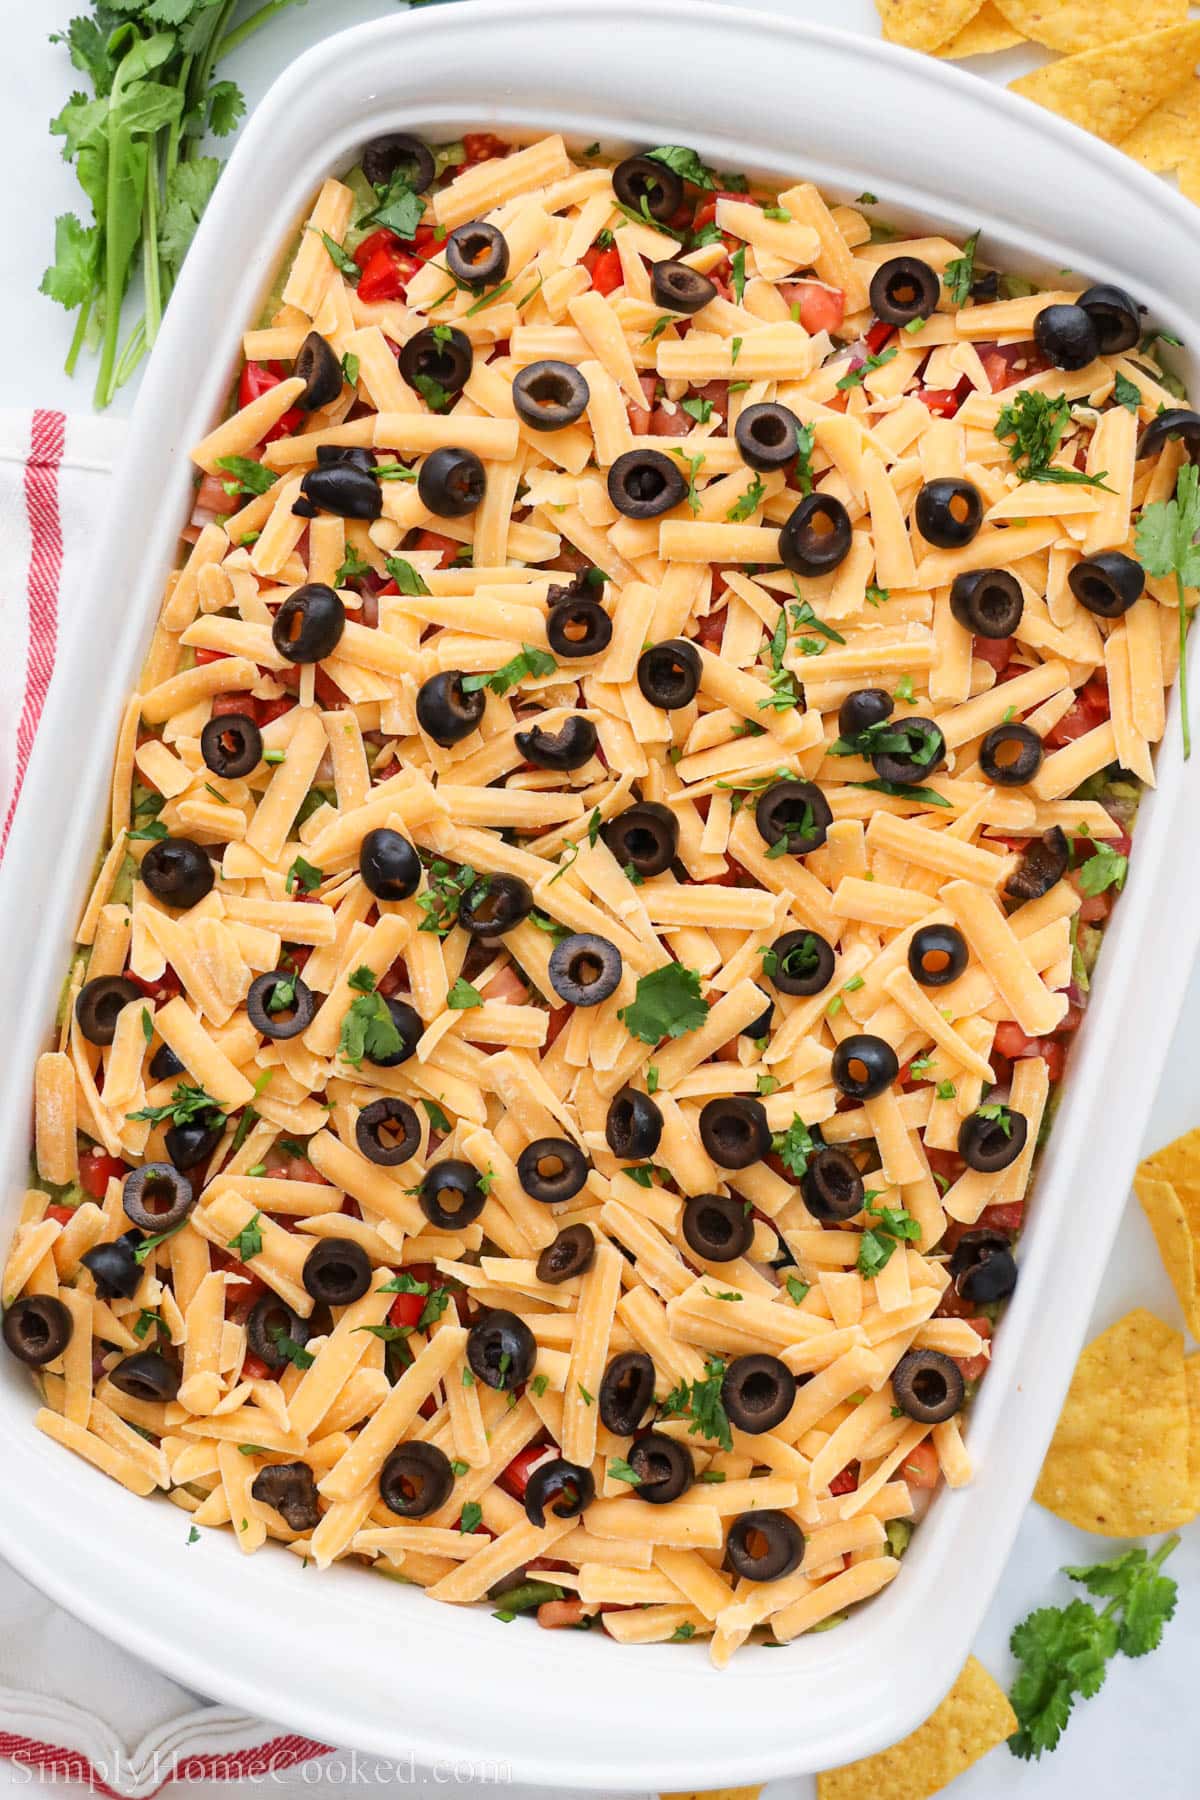 Casserole dish with 7-layer taco dip, topped with cilantro and black olives.